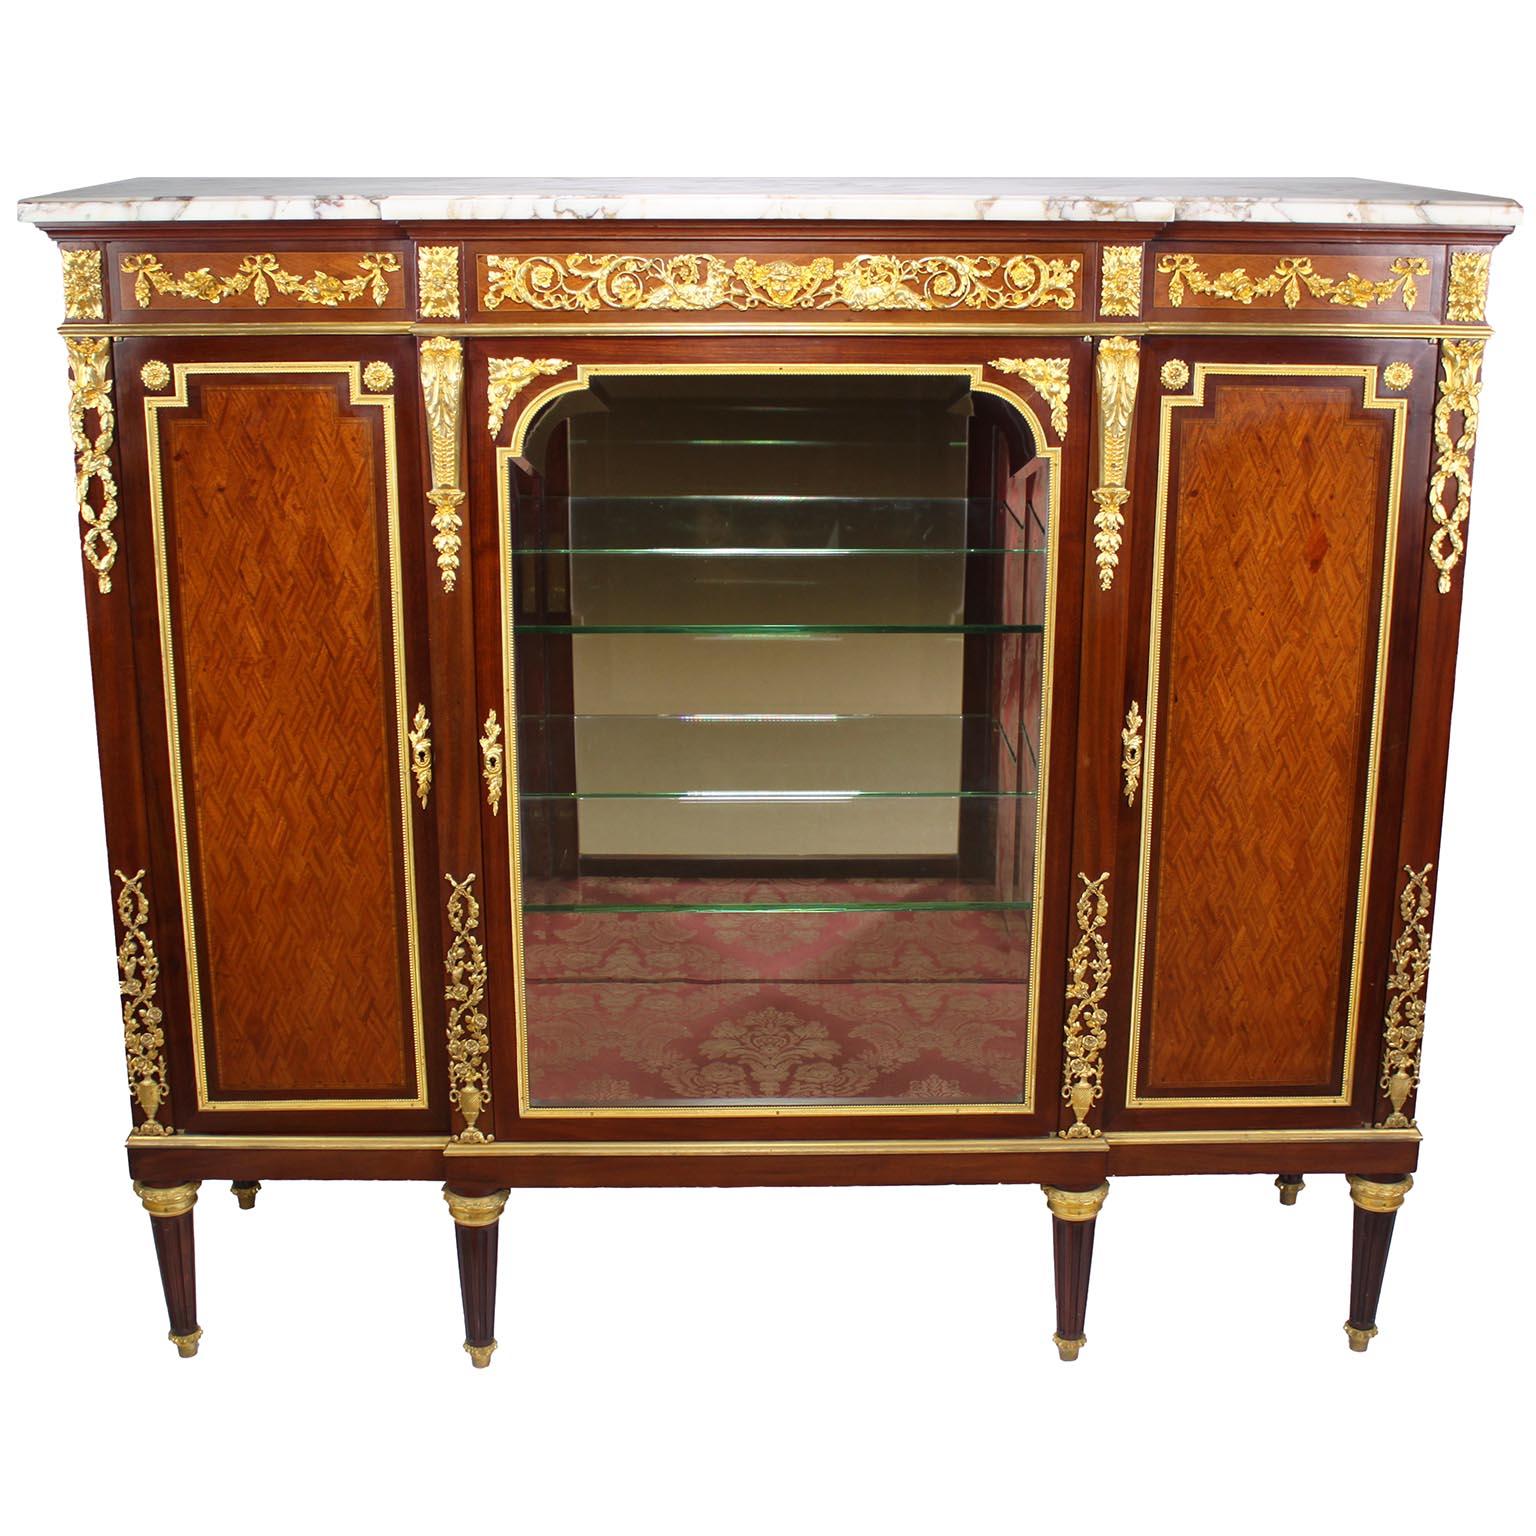 A Very Fine French 19th-20th Century Louis XVI Style Mahogany, Tulipwood and Ormolu-Mounted Parquetry Three-Door Vitrine Commode 'Meuble d'appui with a Brêche Violette Marble Top, attributed to François Linke (1855-1946). The interior of the vitrine